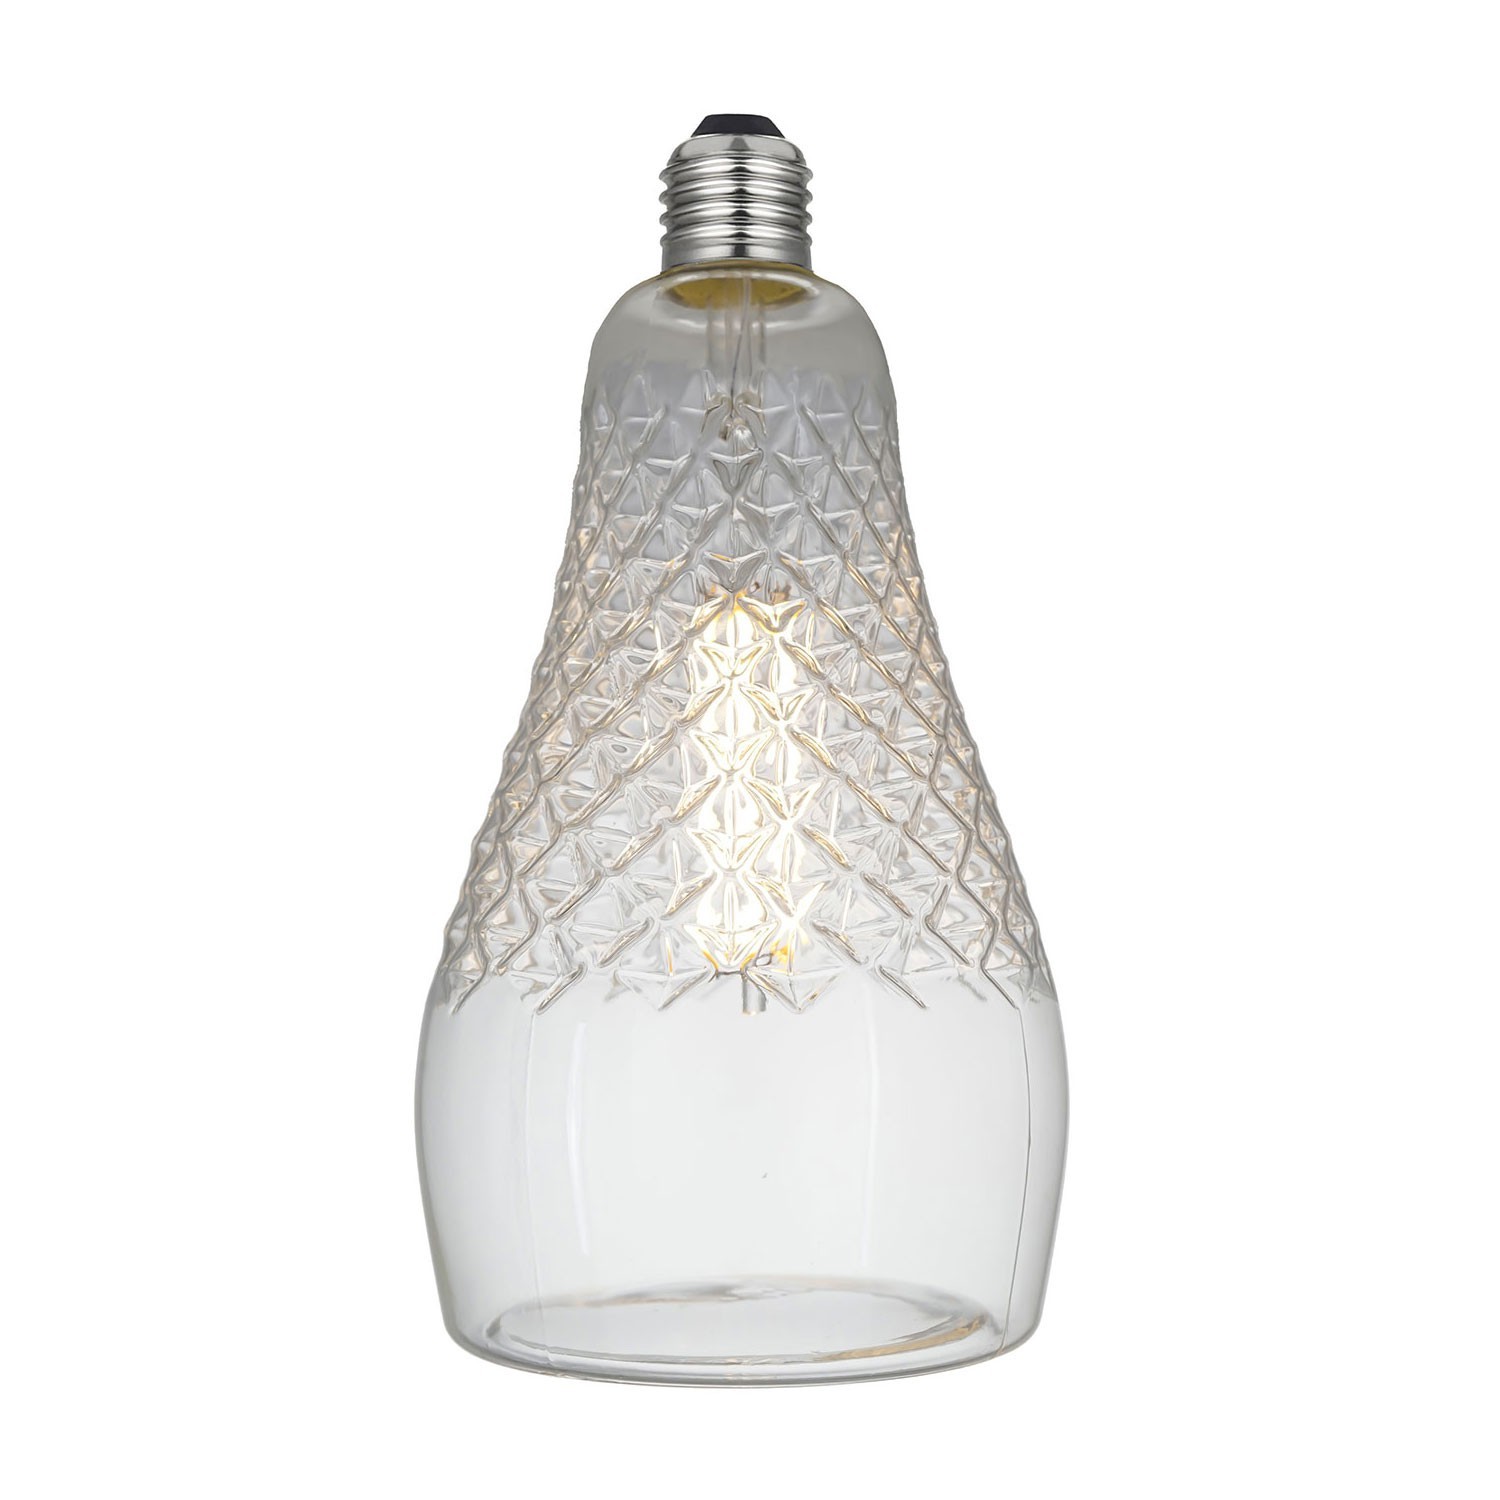 https://www.creative-cables.ch/116705-big_default/ampoule-led-iris-clear-ligne-crystal-6w-e27-dimmable-2700k.jpg